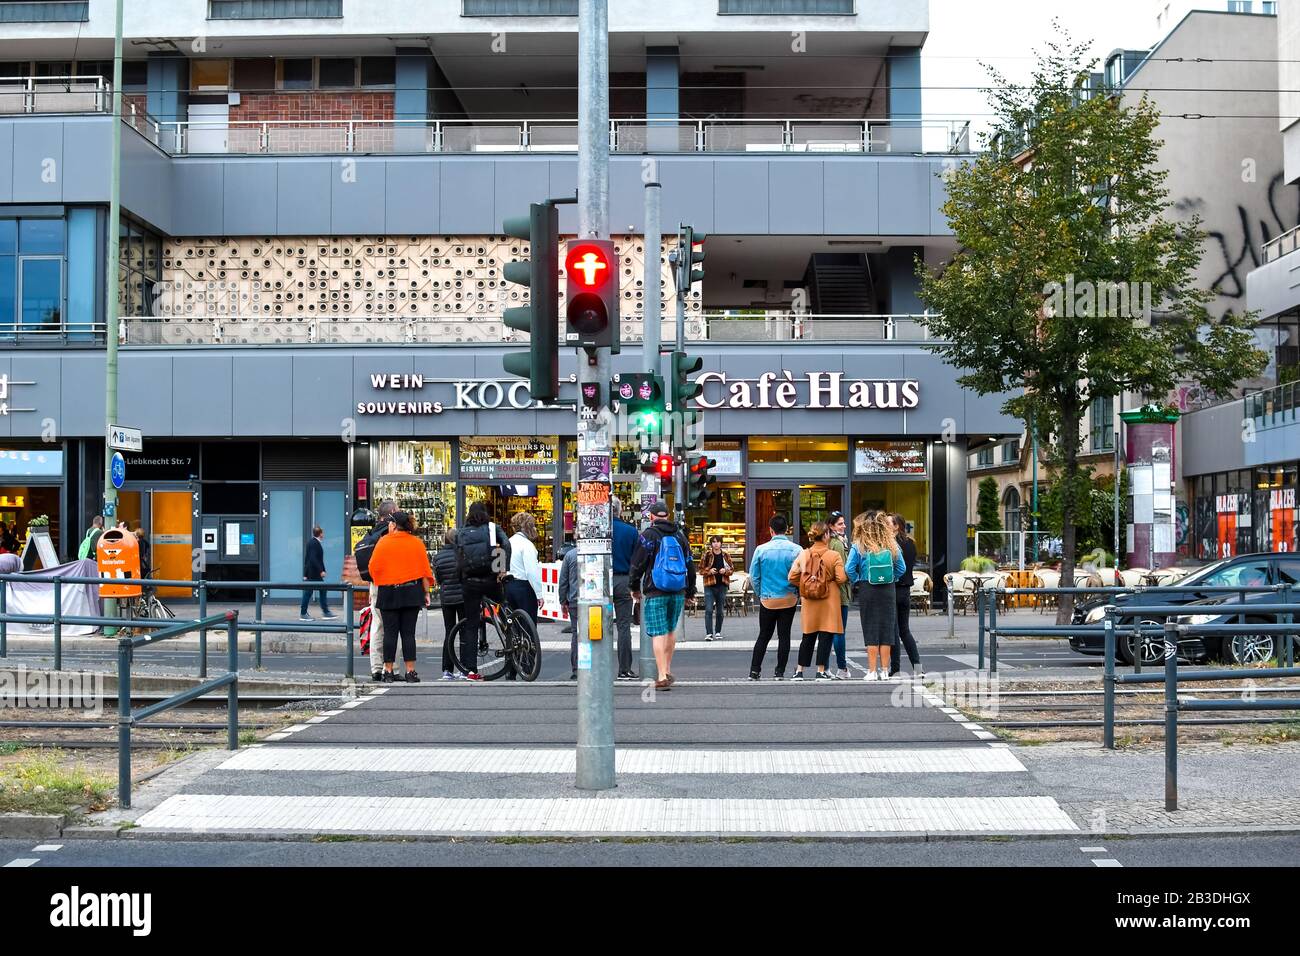 Germans wait at an intersection crosswalk in the urban center of the Mitte District in Berlin Germany. Stock Photo